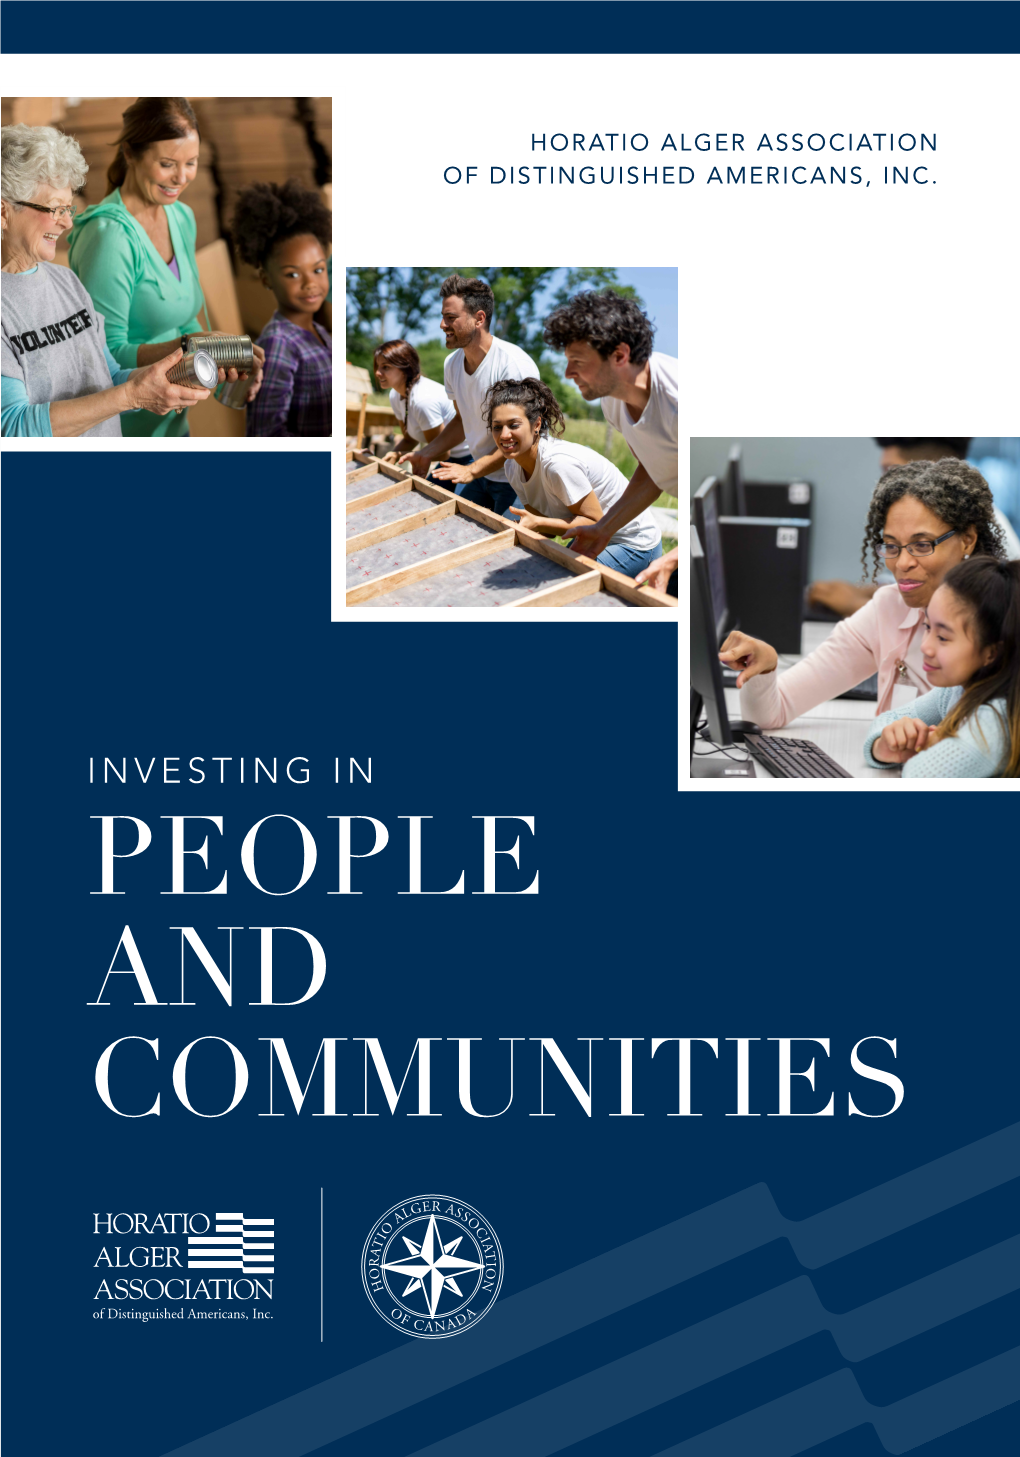 Investing in People and Communities 3 Horatio Alger Association of Distinguished Americans, Inc